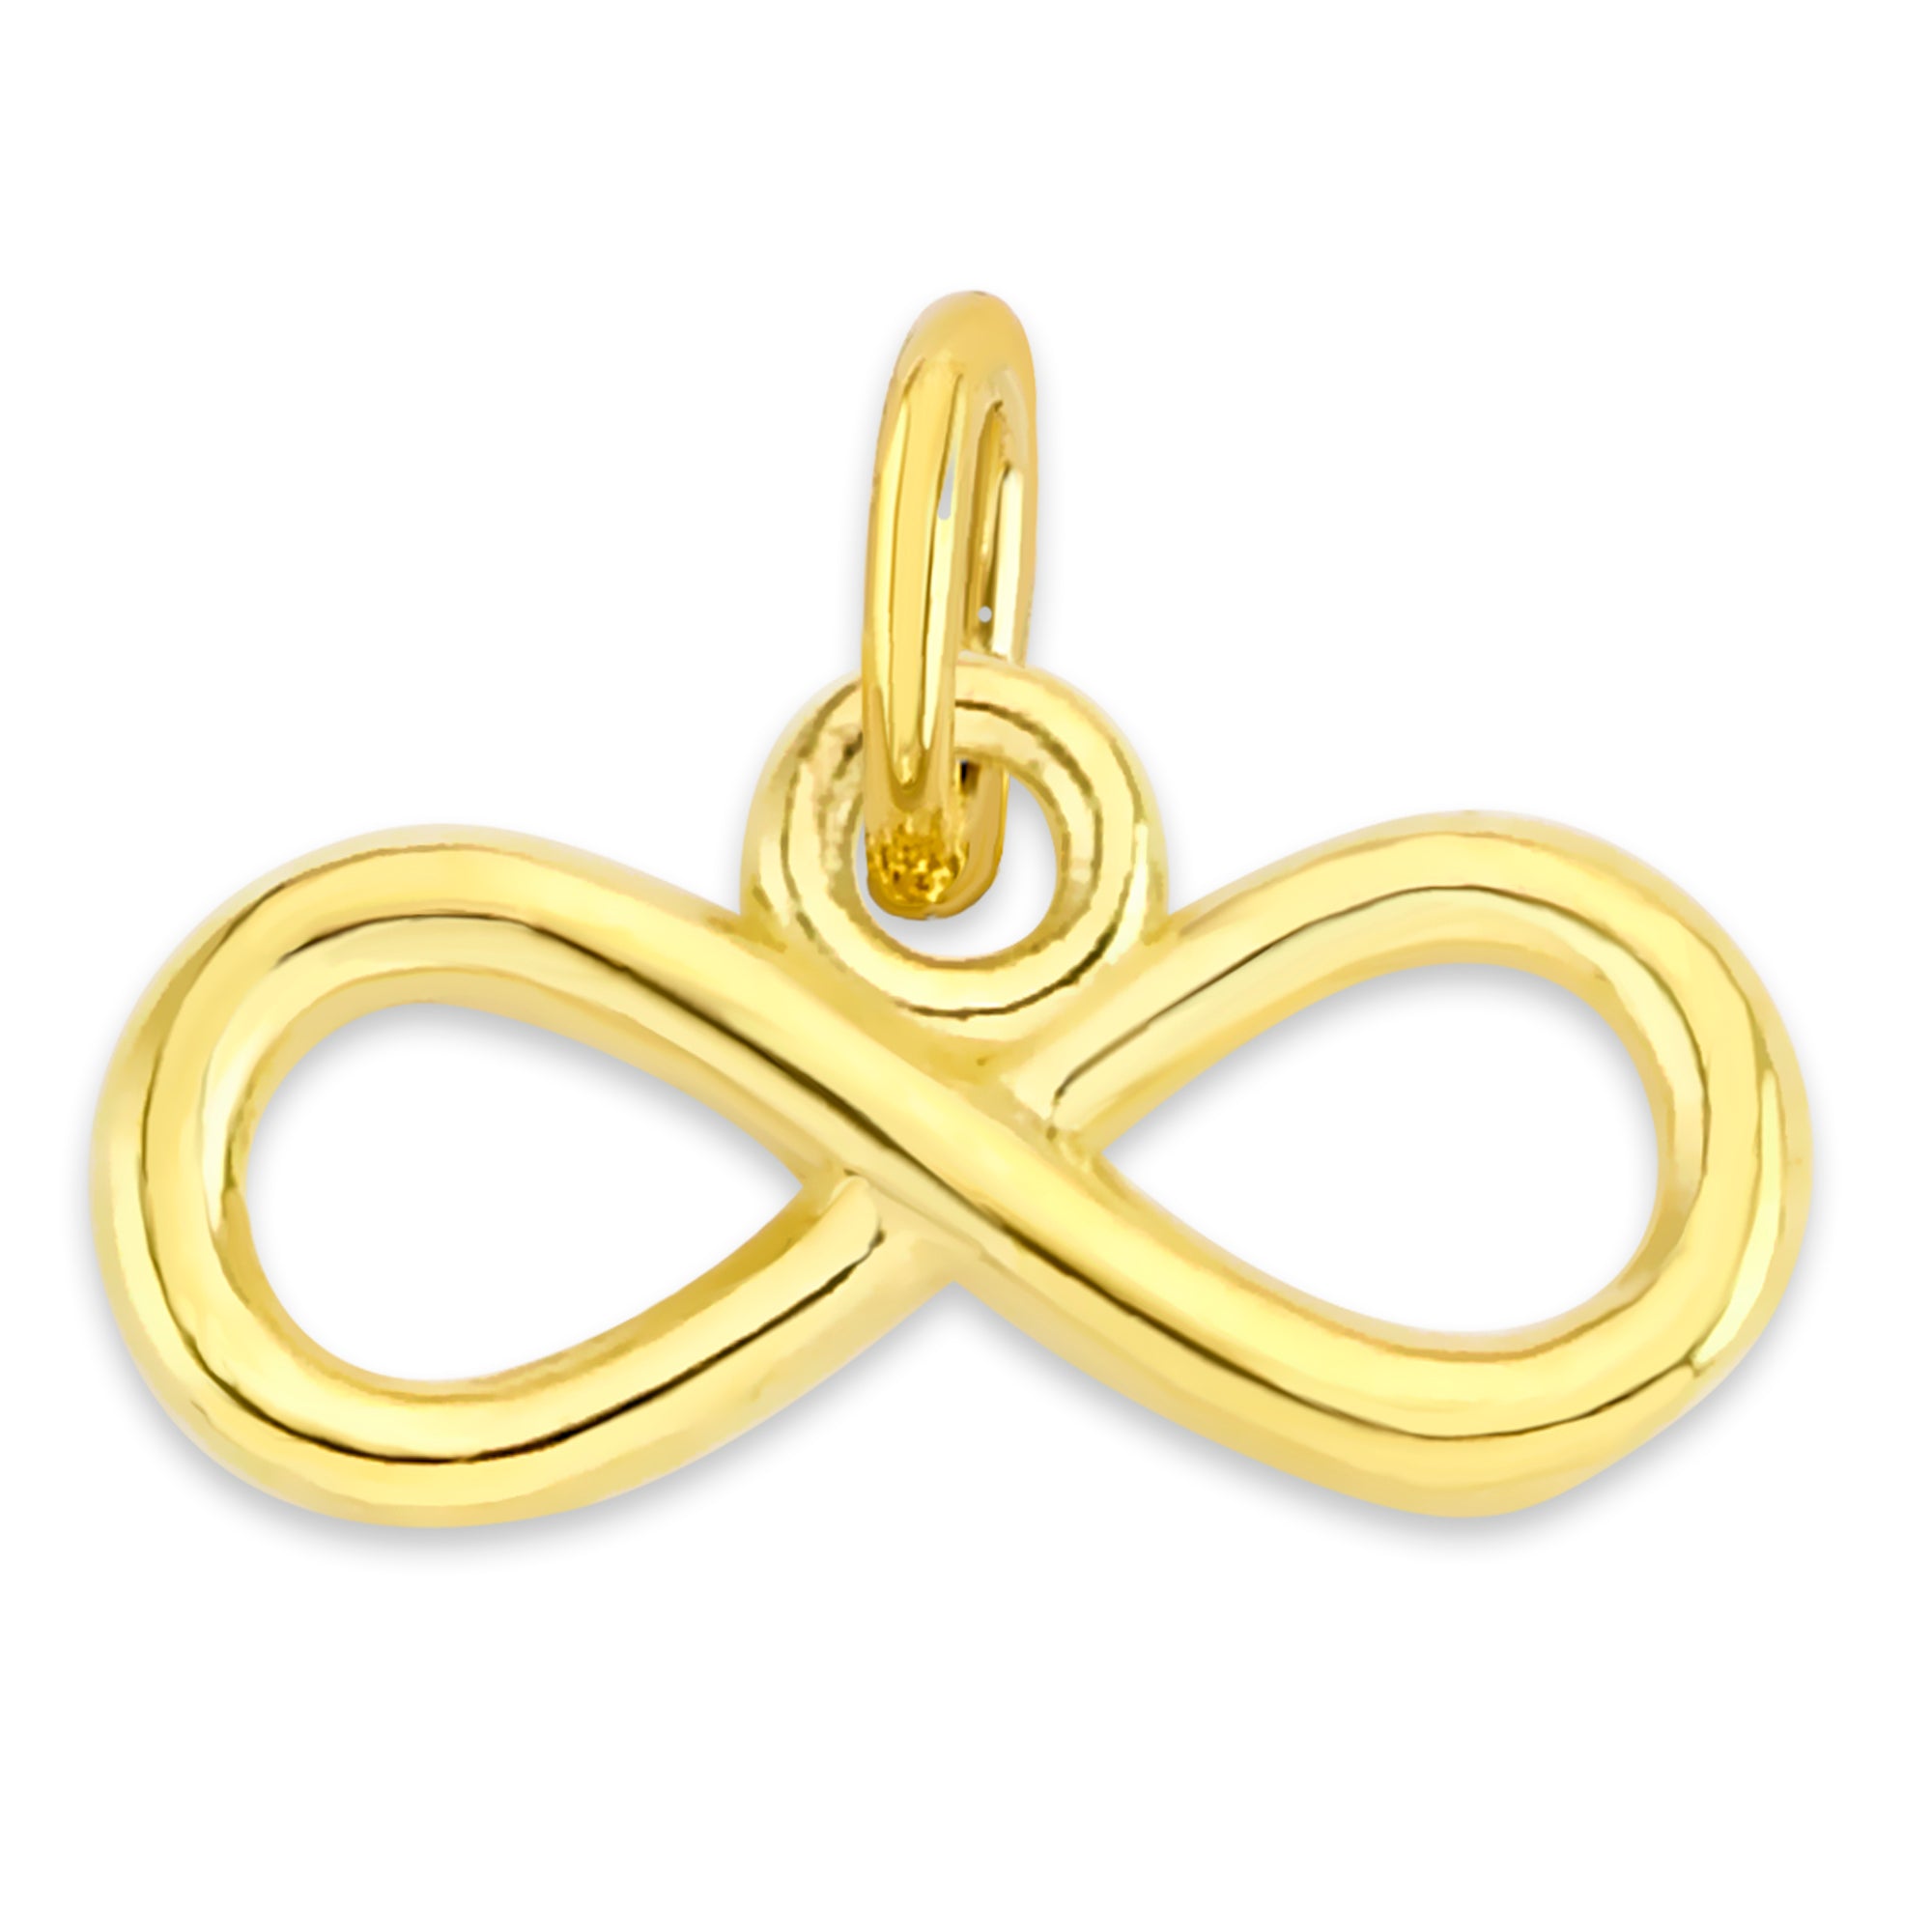 Solid Gold Infinity Charm - 10k or 14k